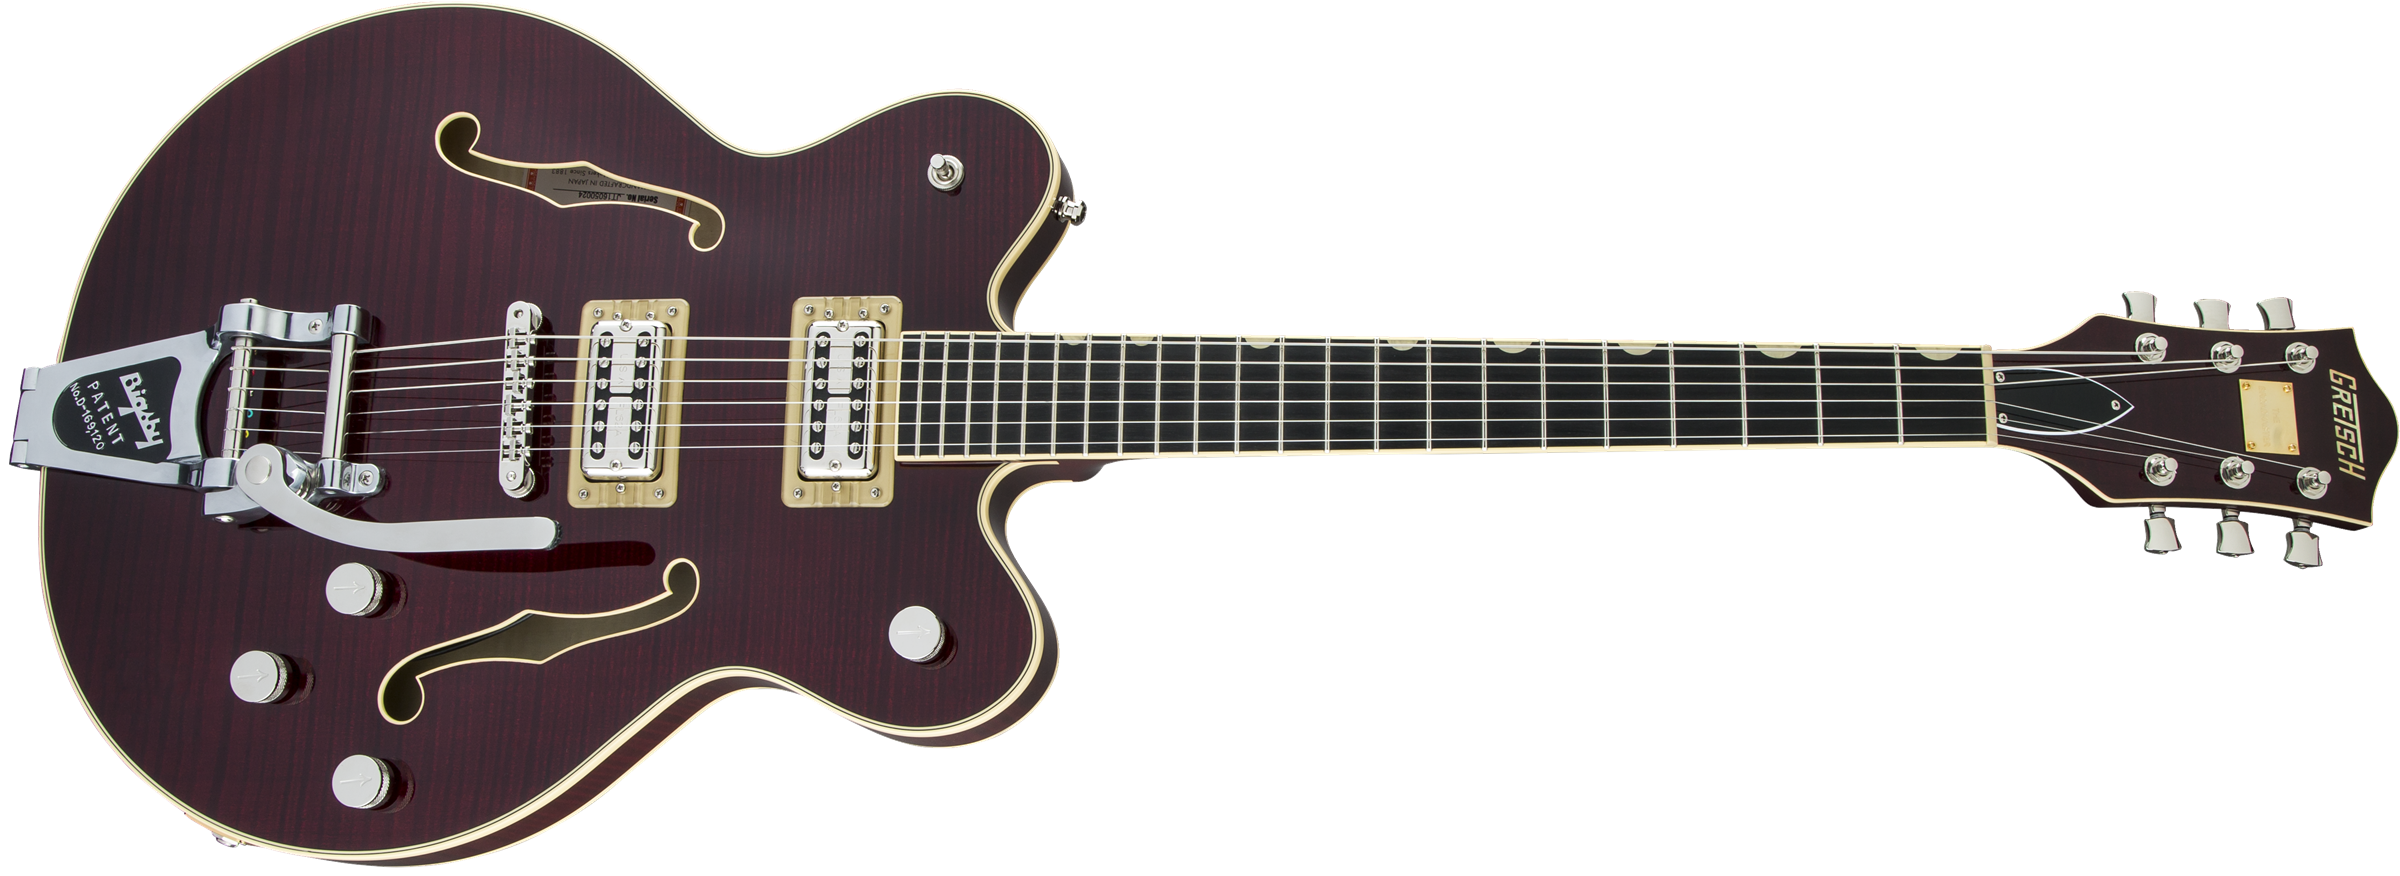 Gretsch G6609TFM Players Edition Broadkaster Center Block Electric Guitar - Dark Cherry Flame